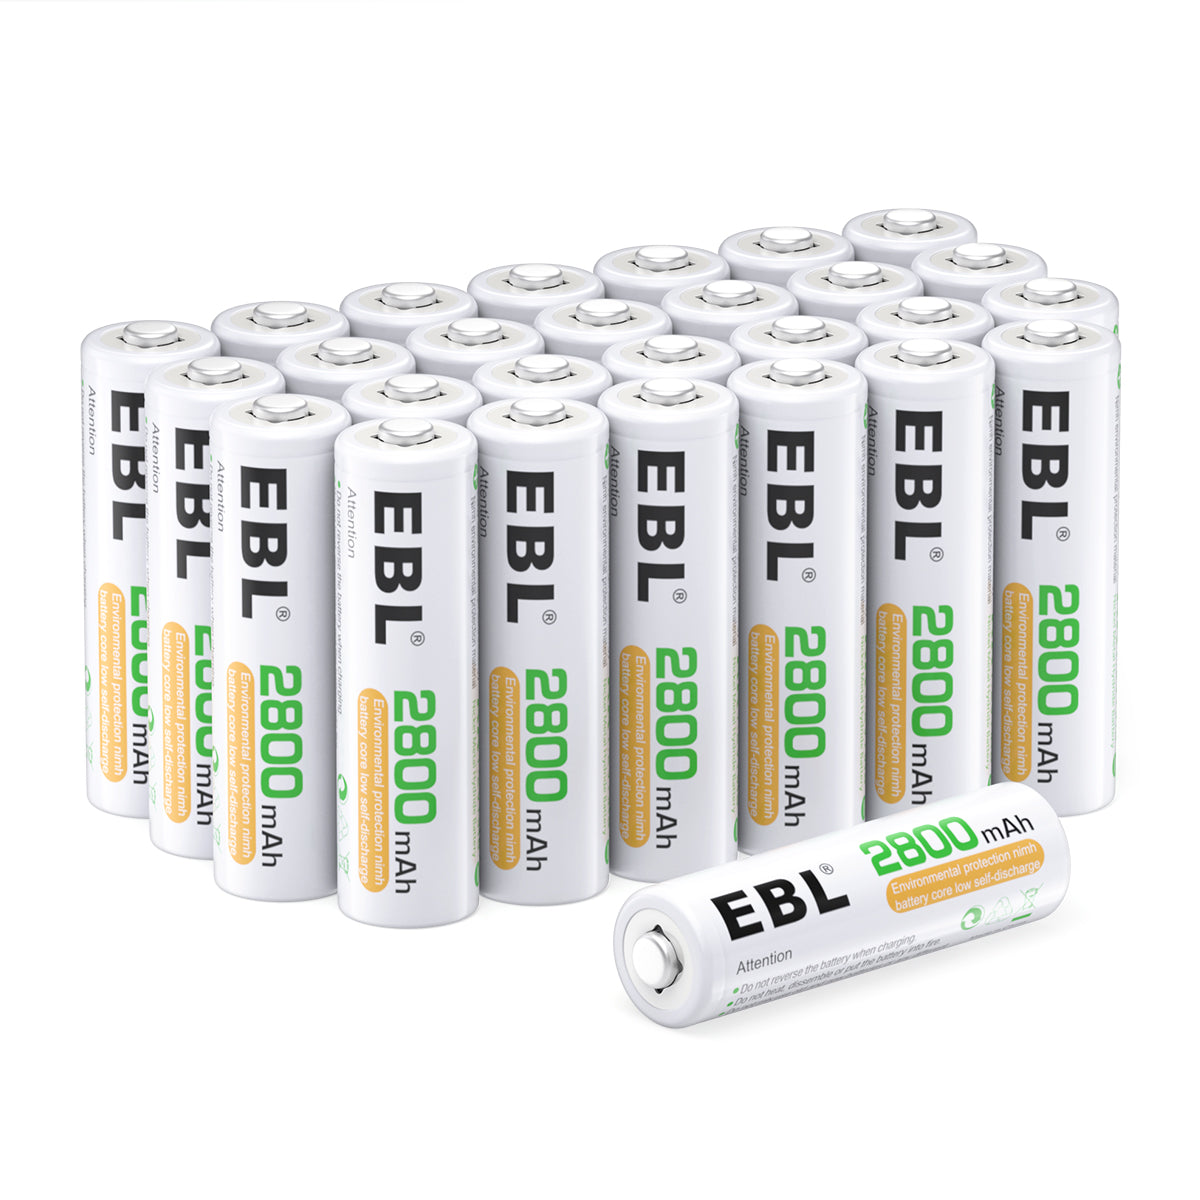 EBL AA 2800mAh 8 Pack Rechargeable Battery Review 